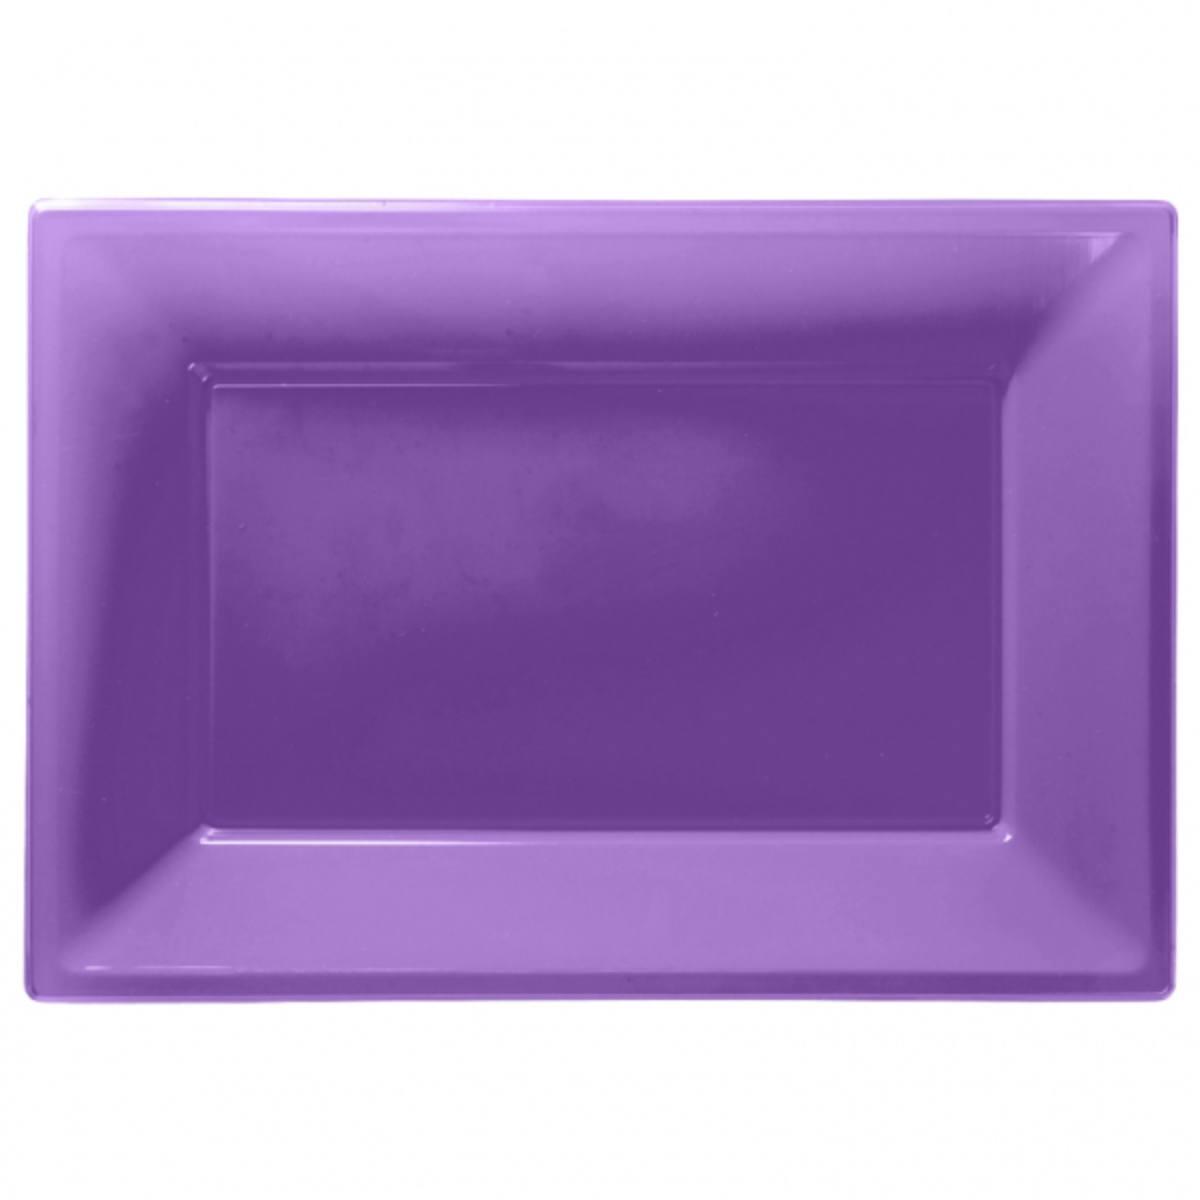 Pack of 3 Purple Plastic Serving Platters by Amscan 997431 available from Karnival Costumes